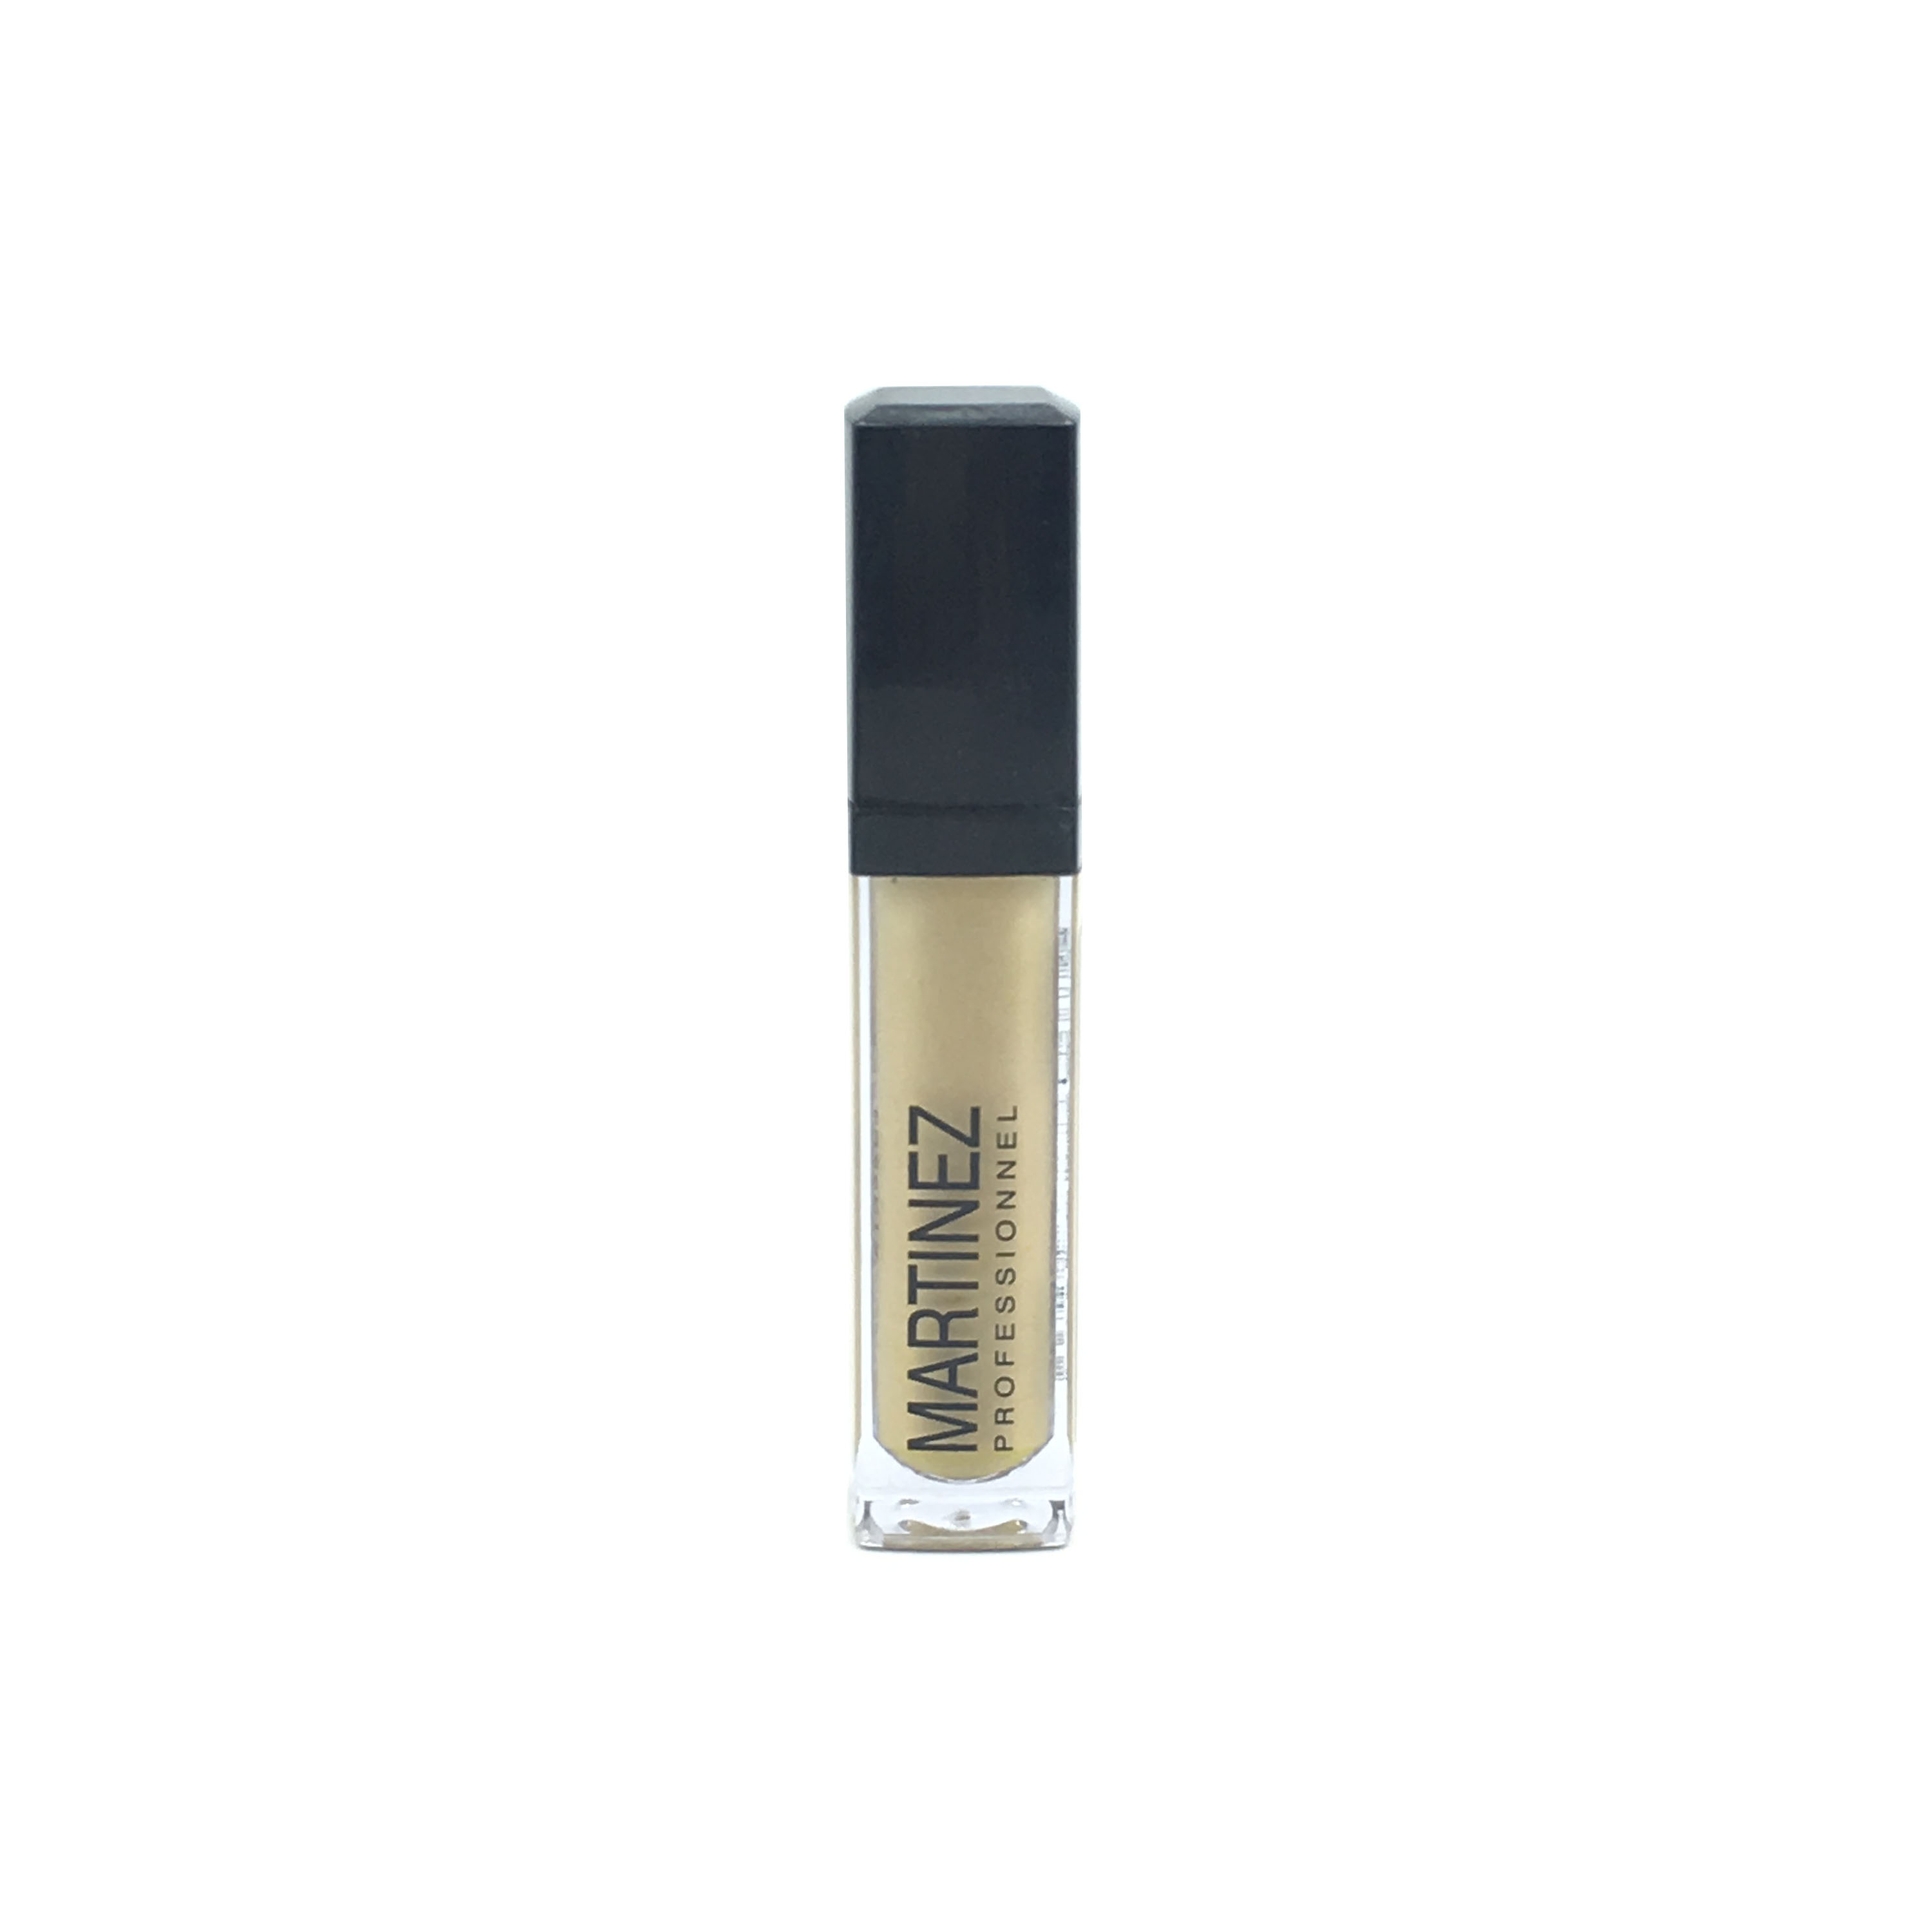 Private Collection Martinez Professionel Concealer 02 Most Almond Faces